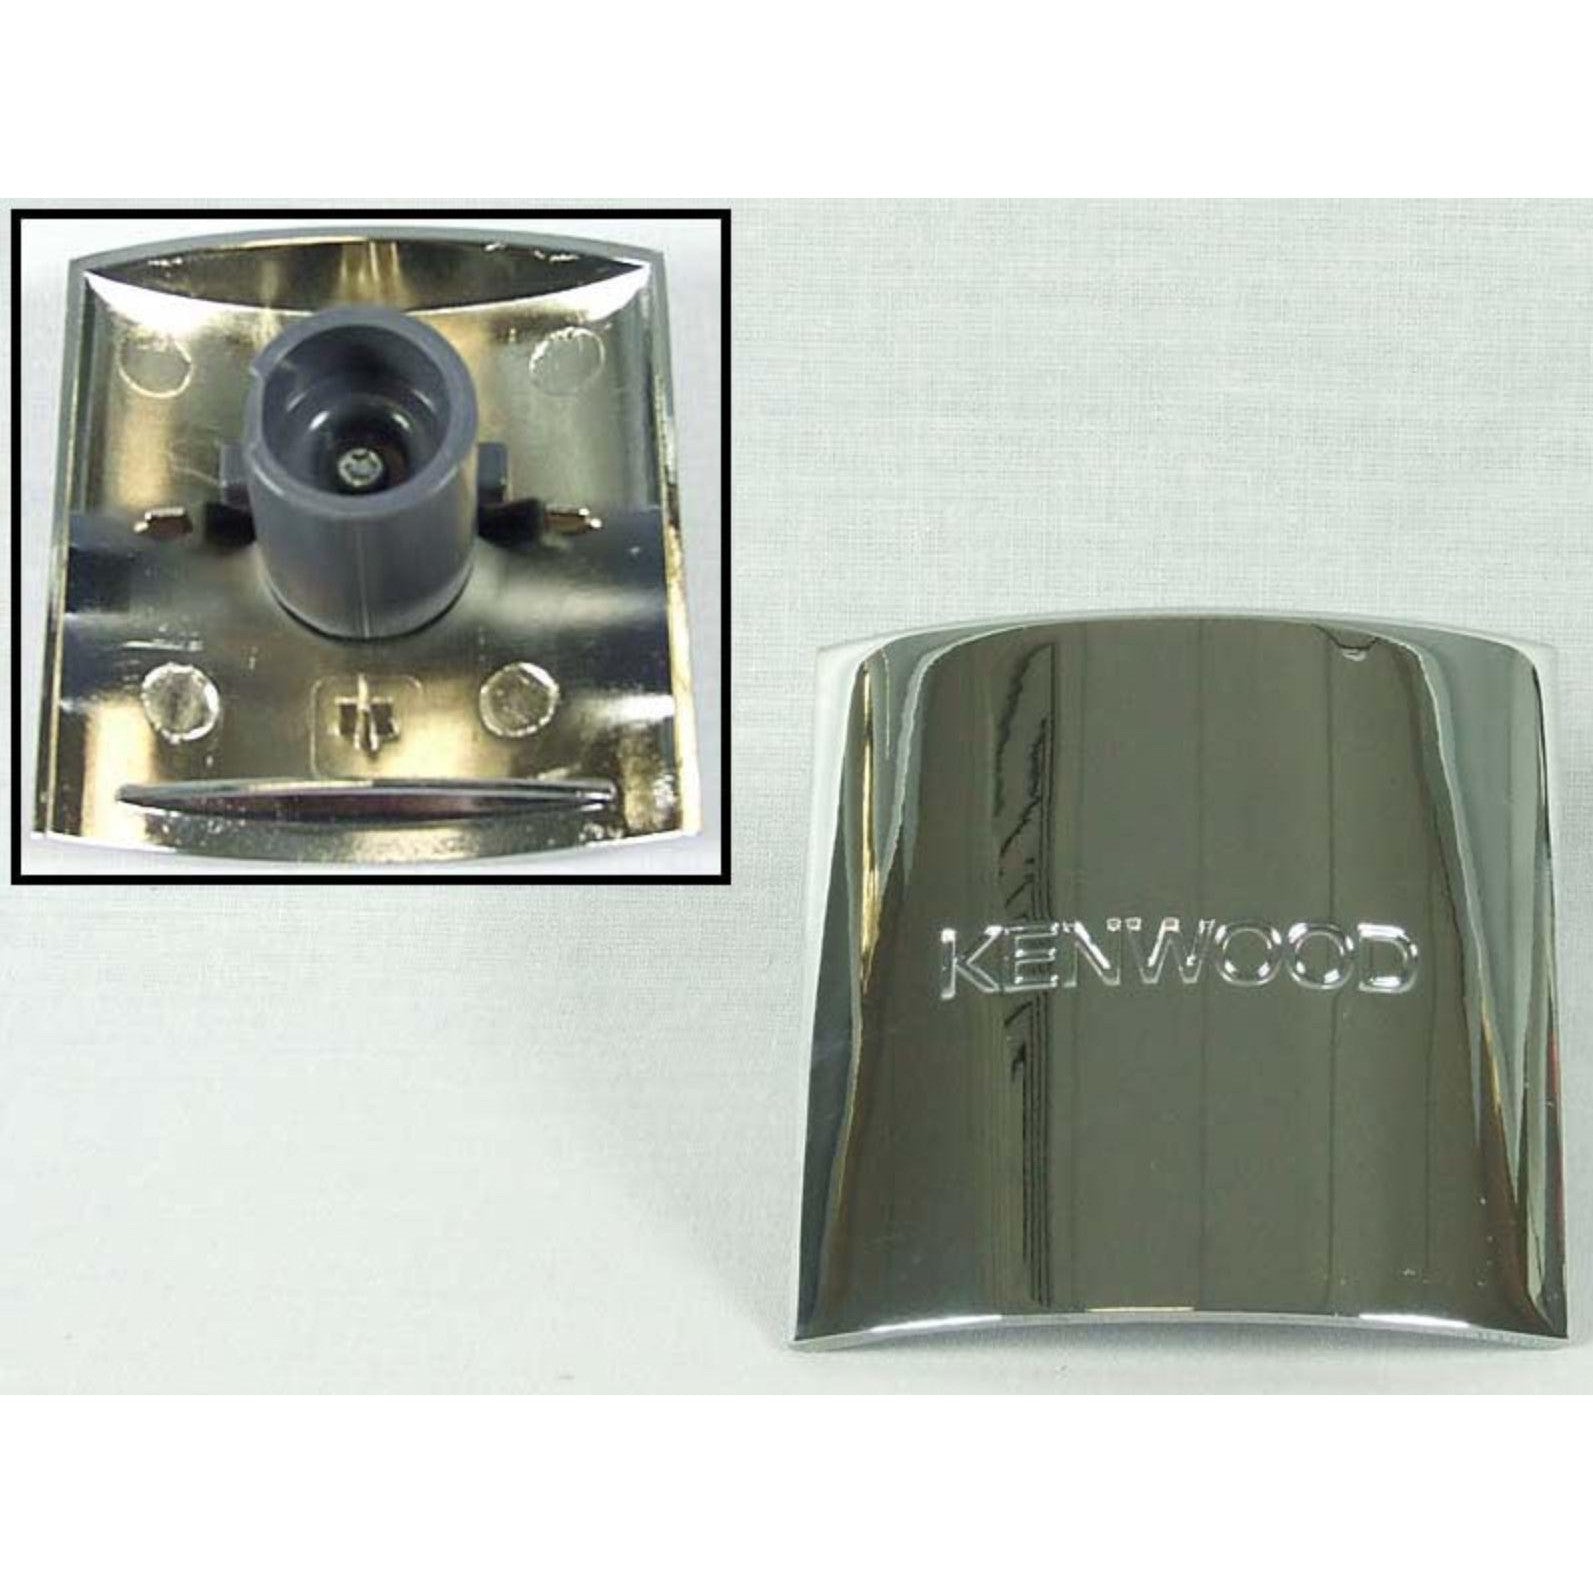 Kenwood Mixer Slow Speed Outlet Cover for KMC015